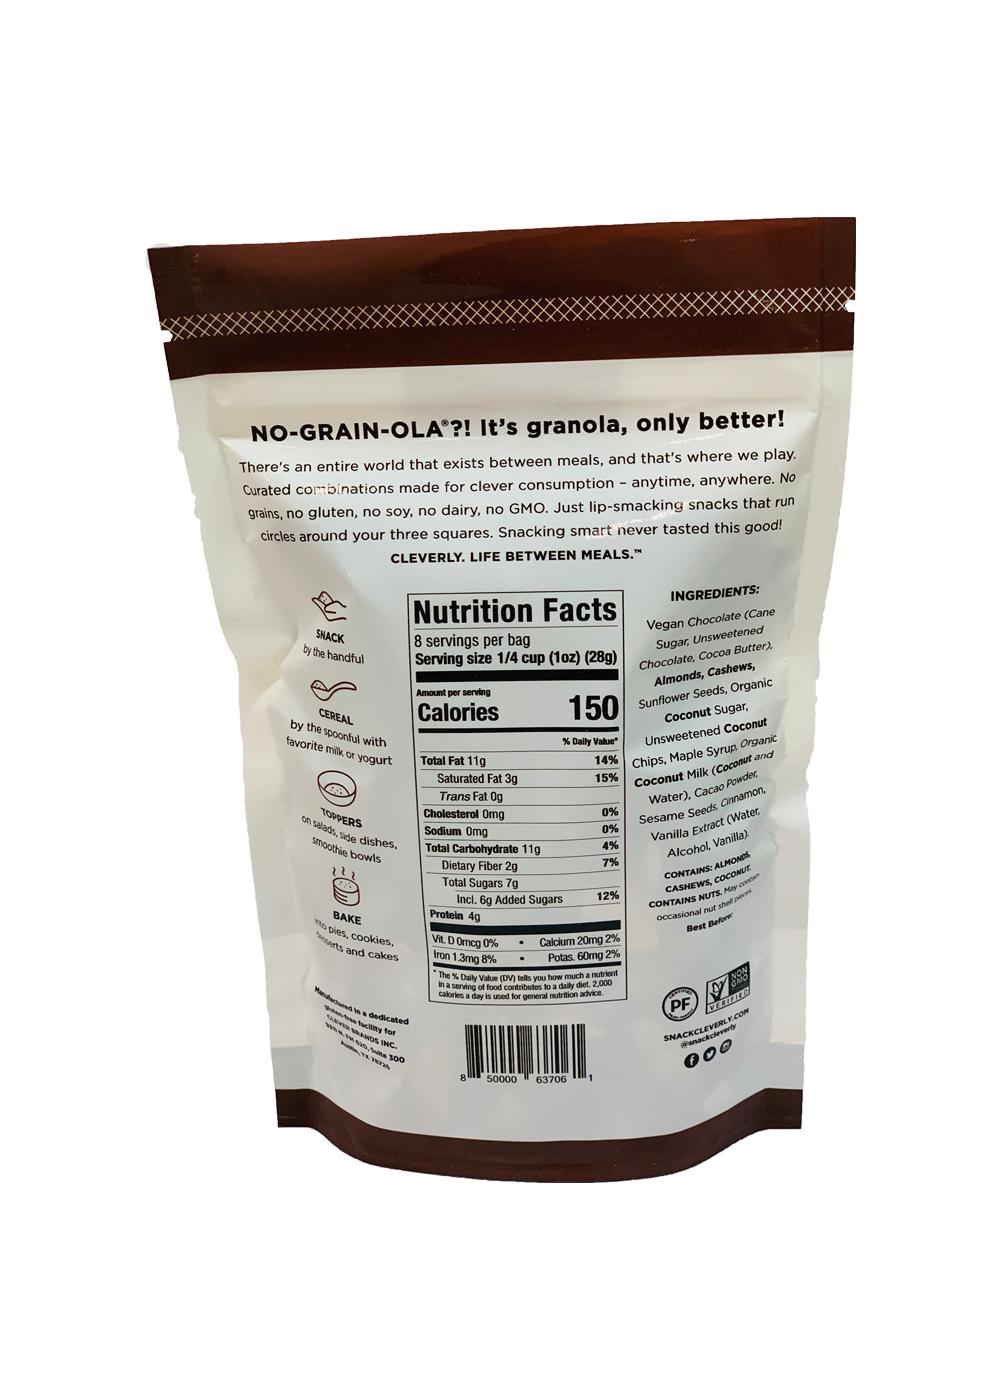 Cleverly Grain-Free No-Grain-Ola - Holy-Coco-Cacao!; image 6 of 6